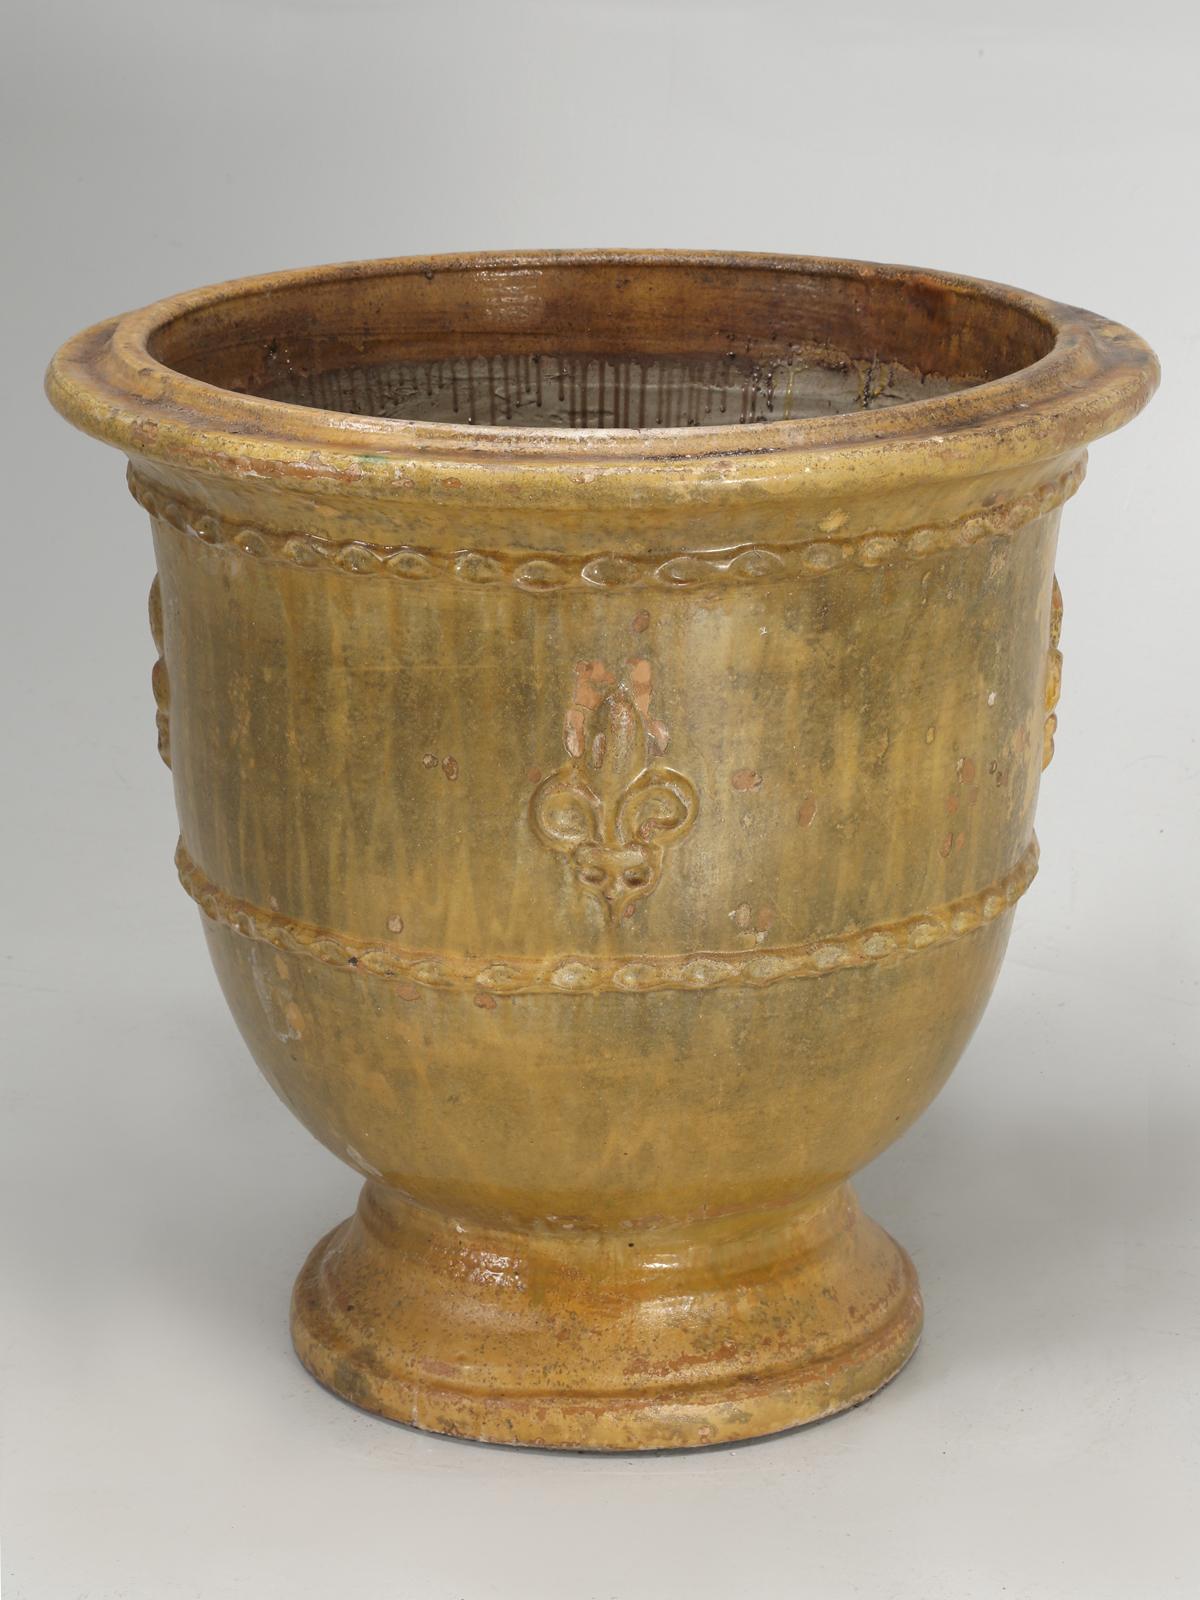 This particular vase or pot was produced by Poterie de la Madeleine in Anduze, France. This particular planter, has weathered many Chicago Winters and has been repaired over the years. This particular Anduze planter, has not been treated to a faux